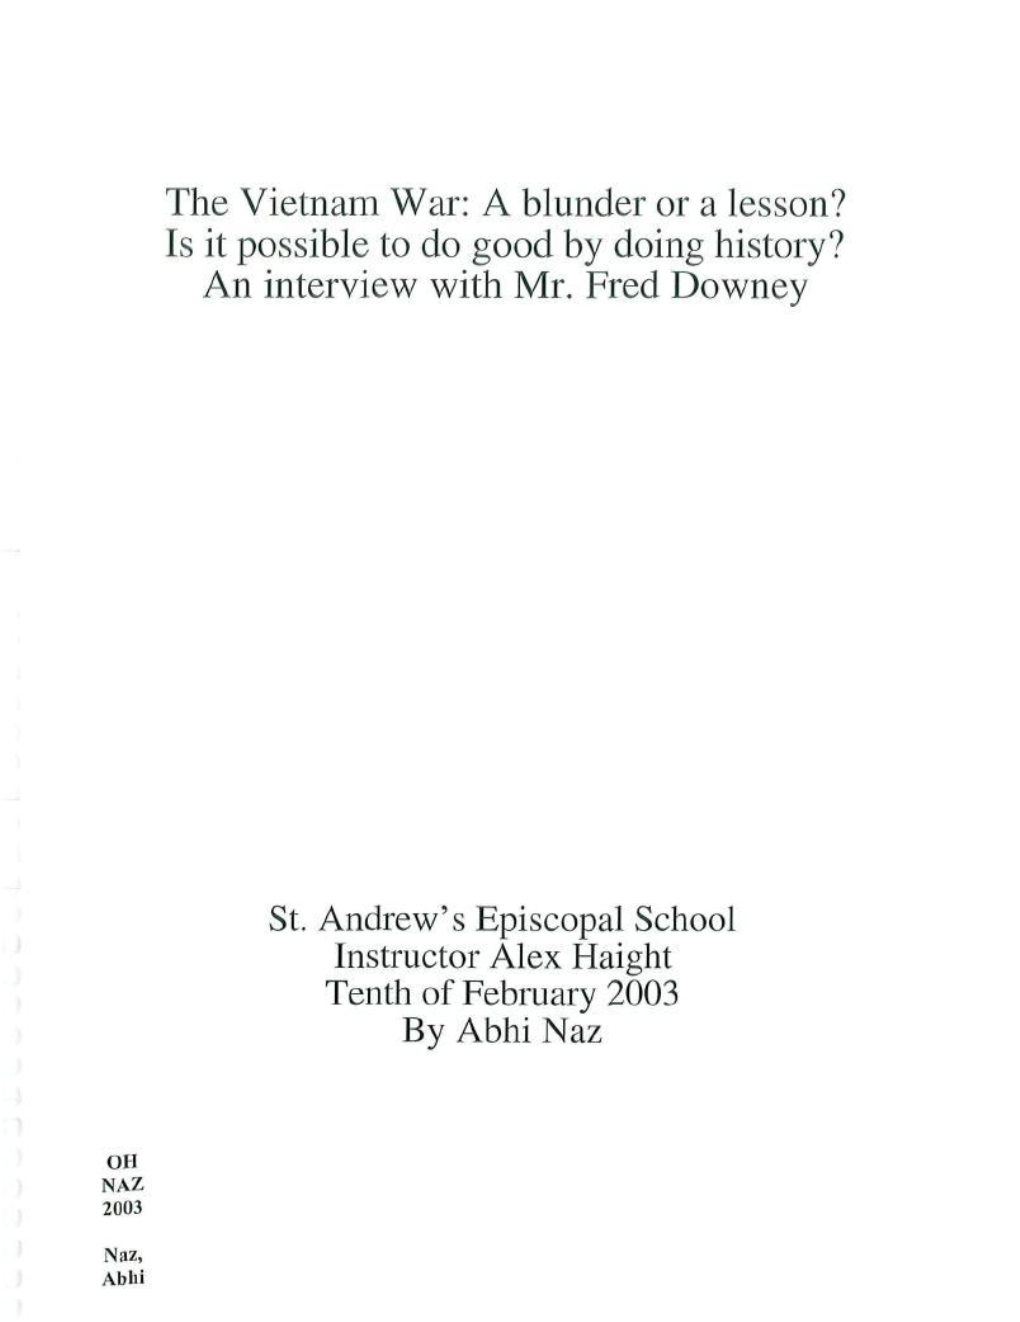 The Vietnam War: a Blunder Or a Lesson? Is It Possible to Do Good by Doing History? an Interview with Mr, Fred Downey